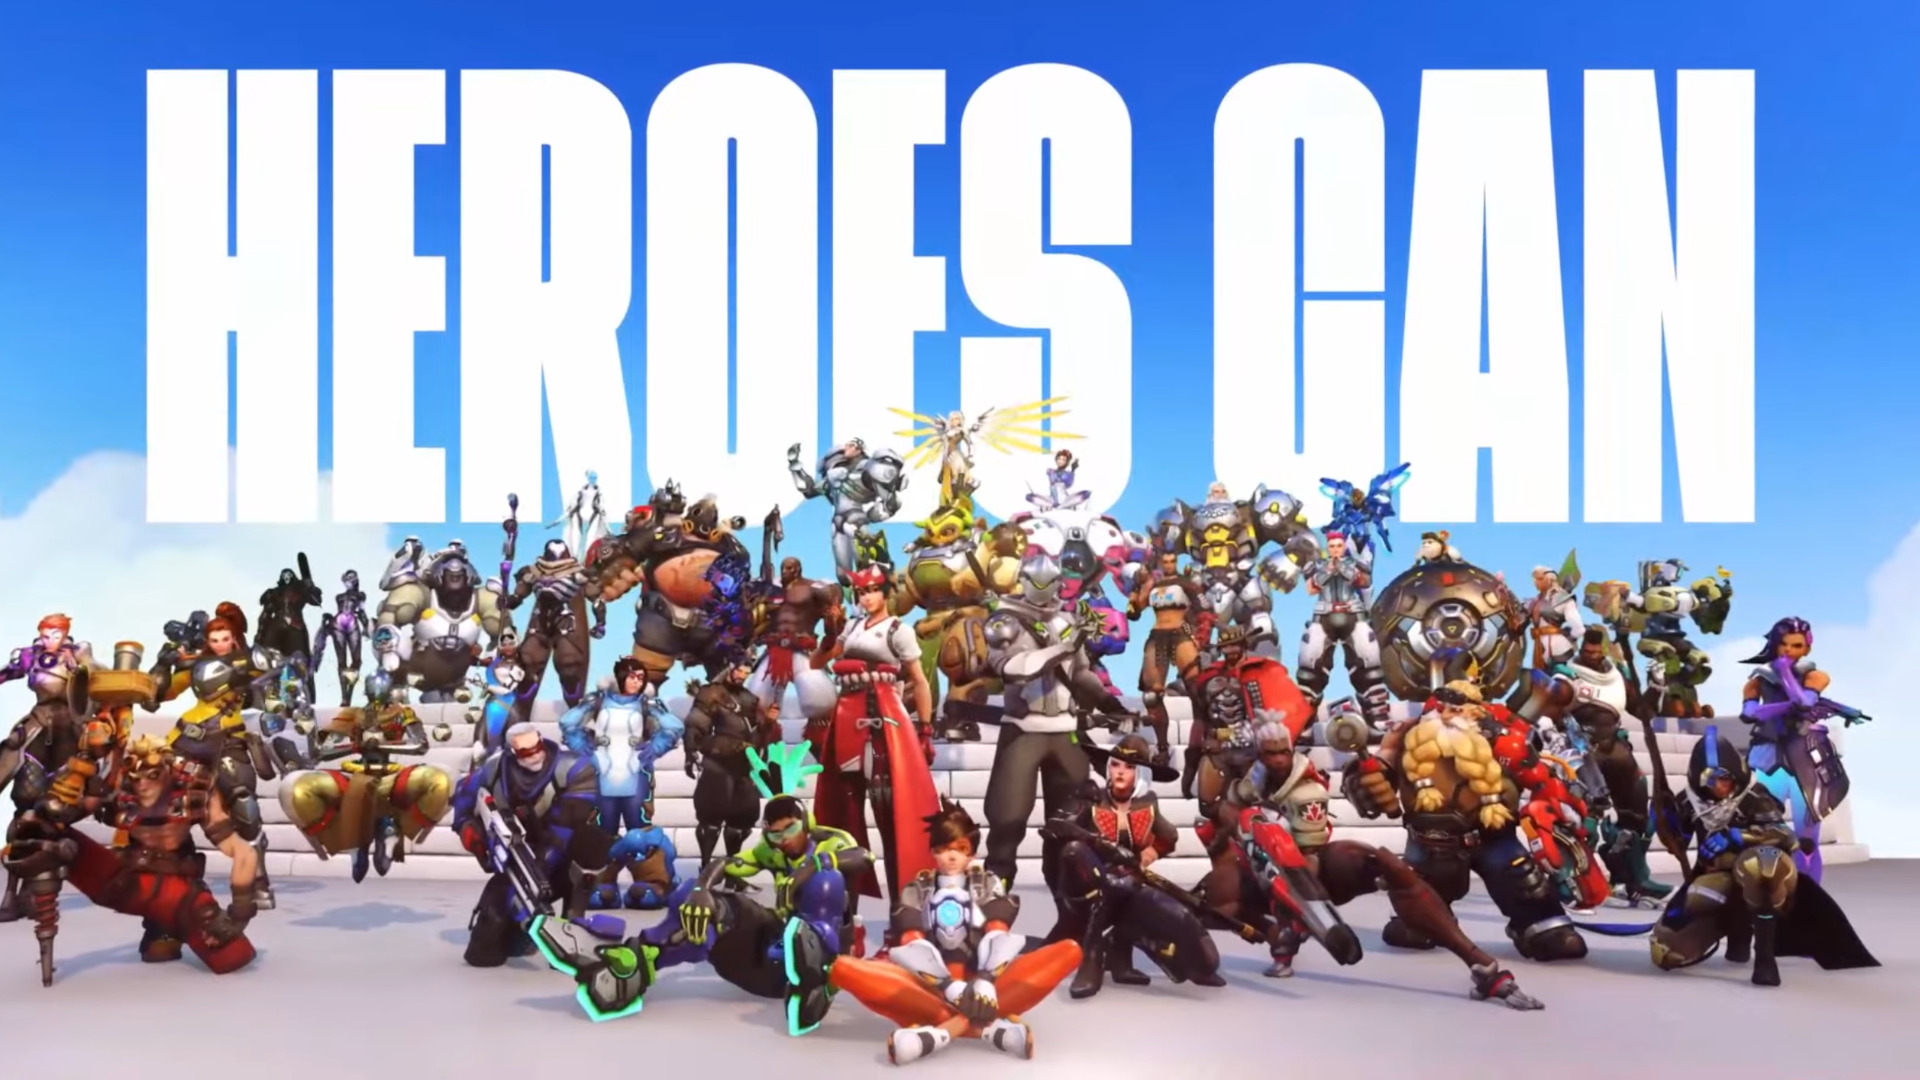 All the Overwatch Characters in Heroes of the Storm! 